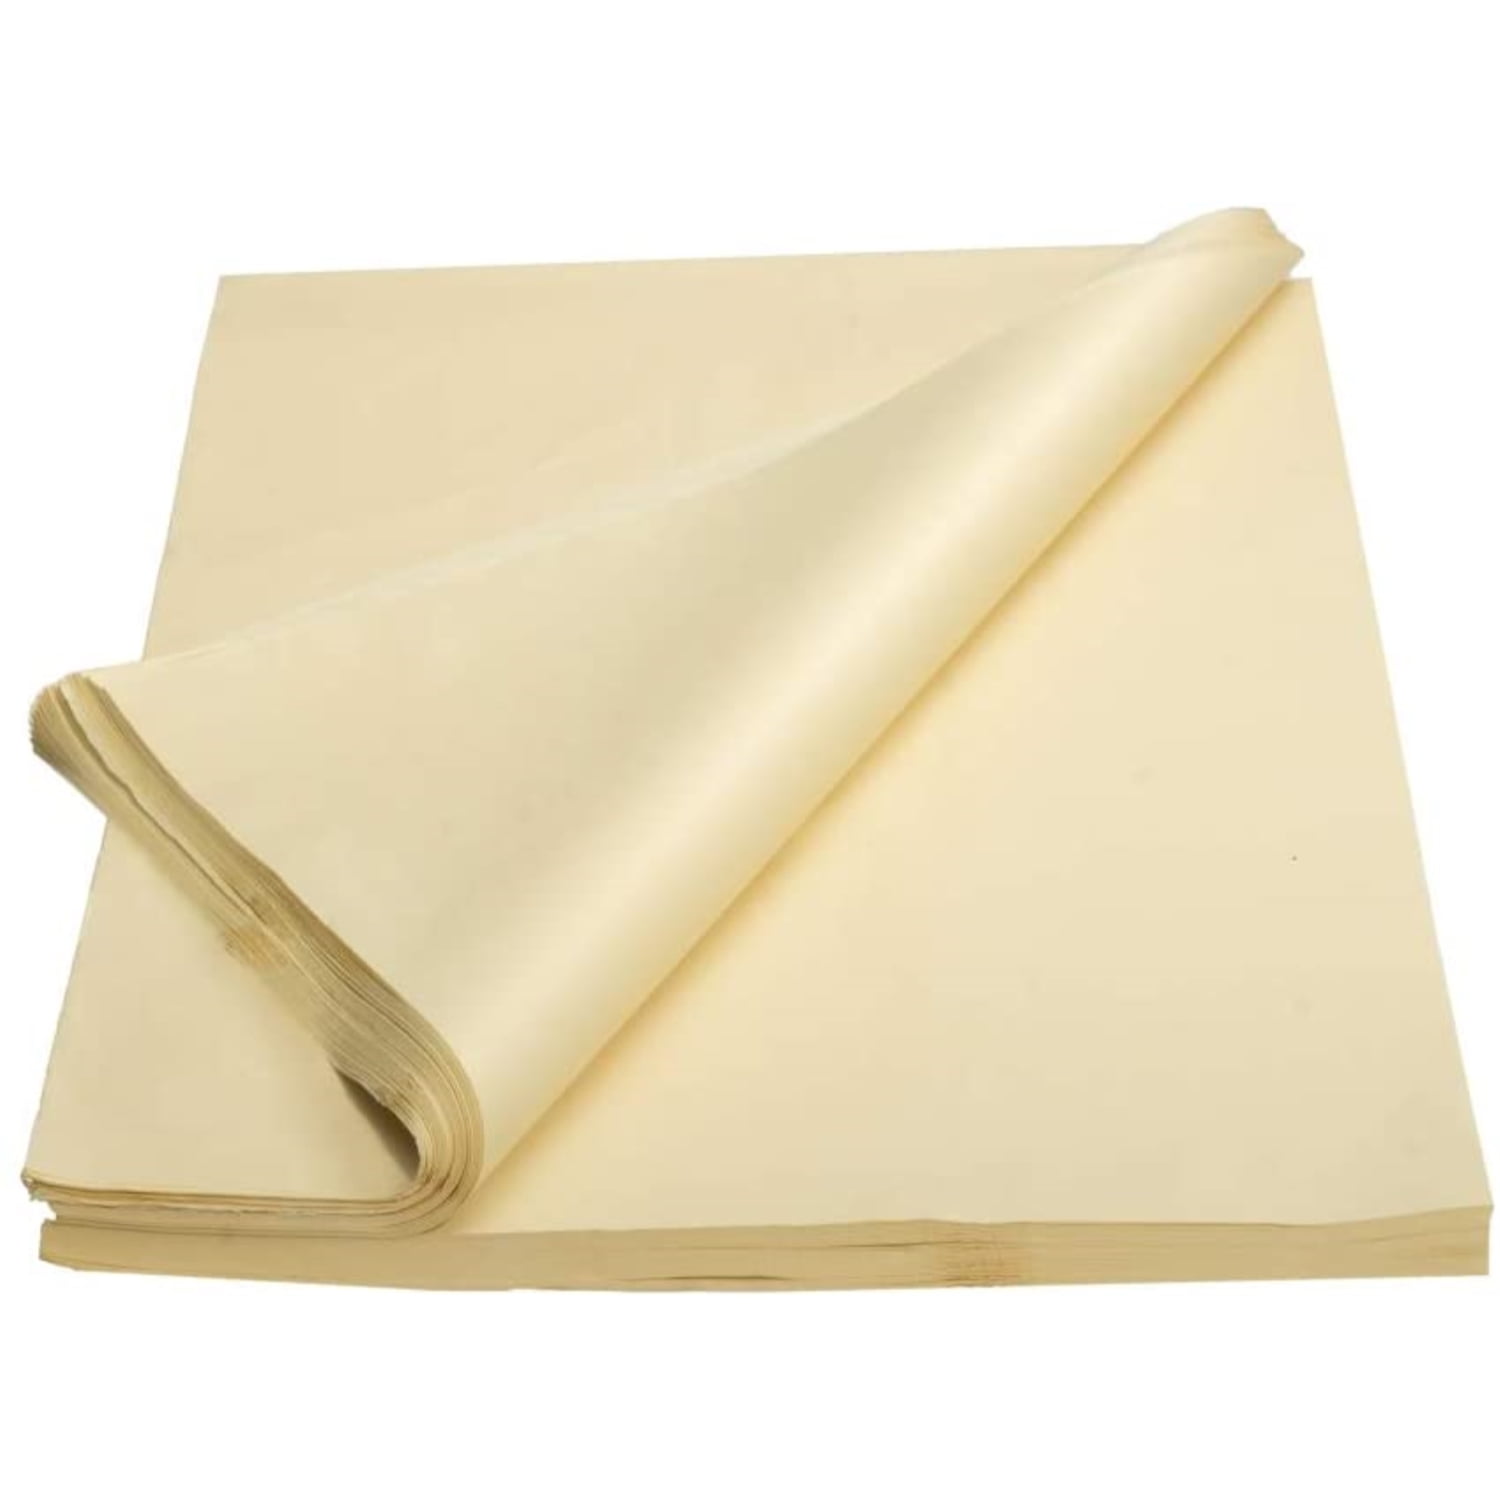 480 Sheets - 20 in. x 30 in. Packing Paper Sheets For Gift Wrapping And  Packing, Tissue Paper Ream - Gray